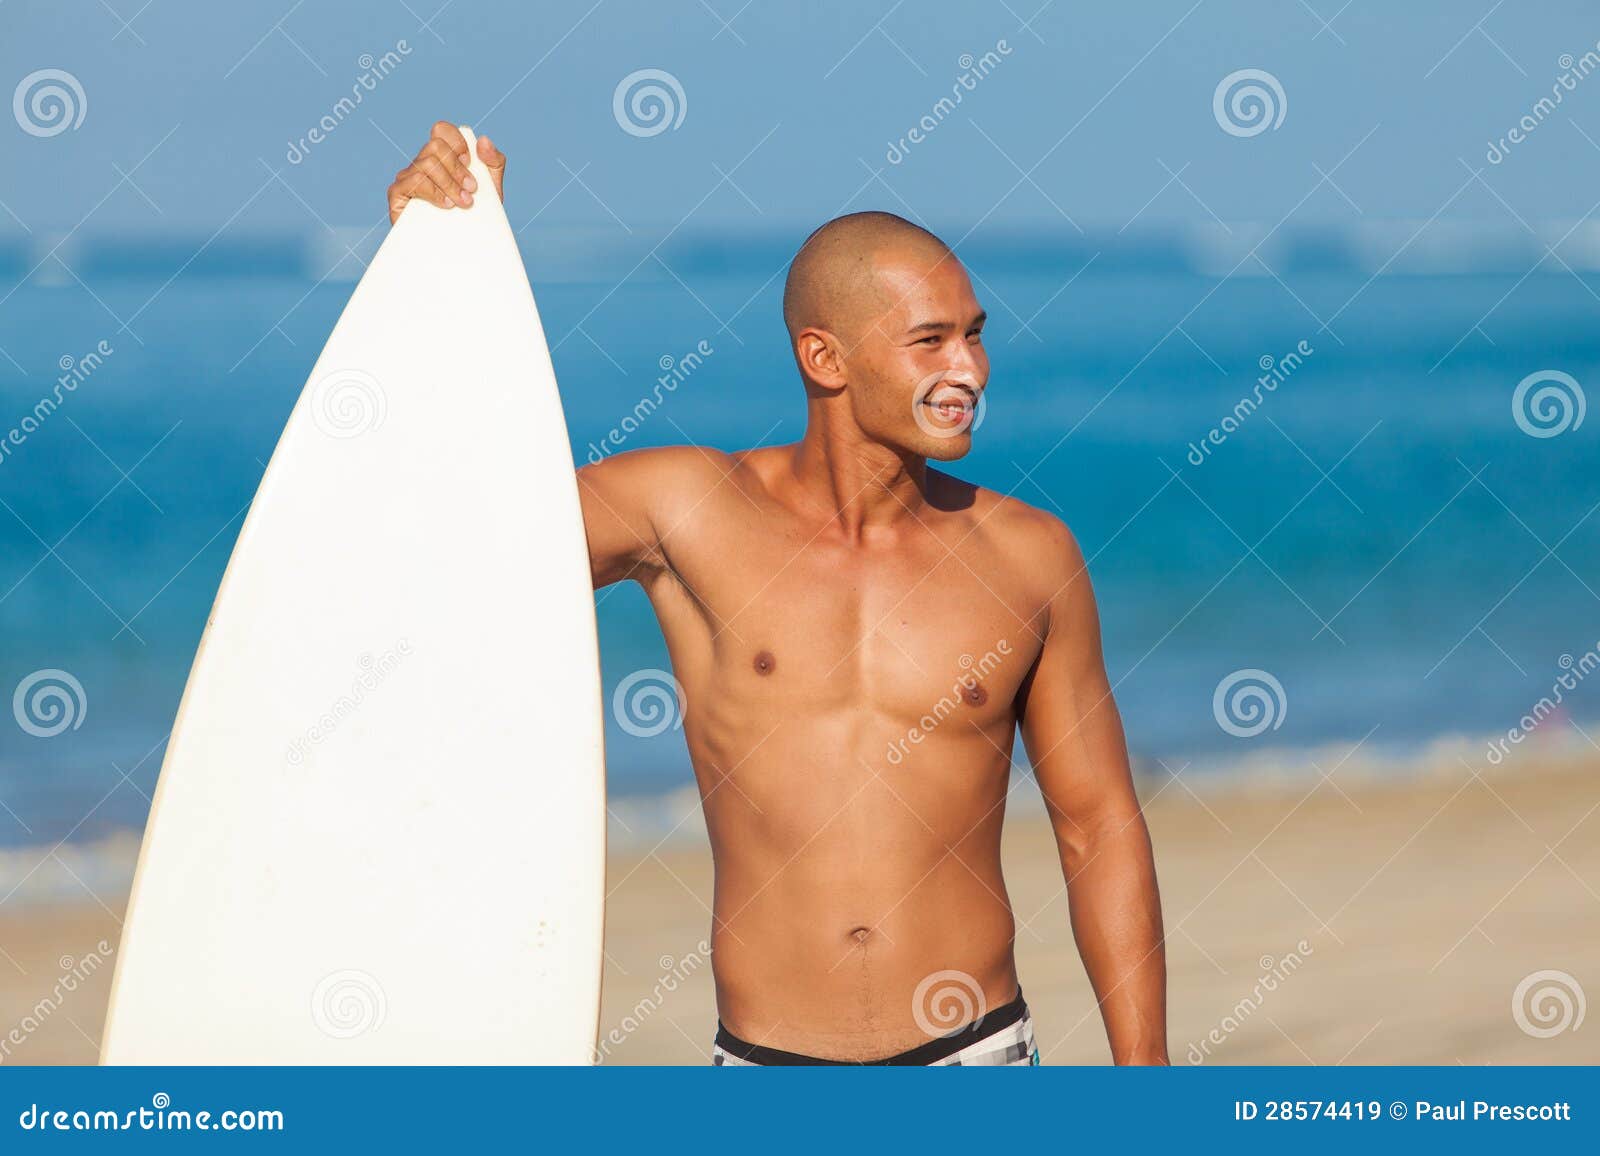 Young man with surfboard stock image. Image of athletic - 28574419